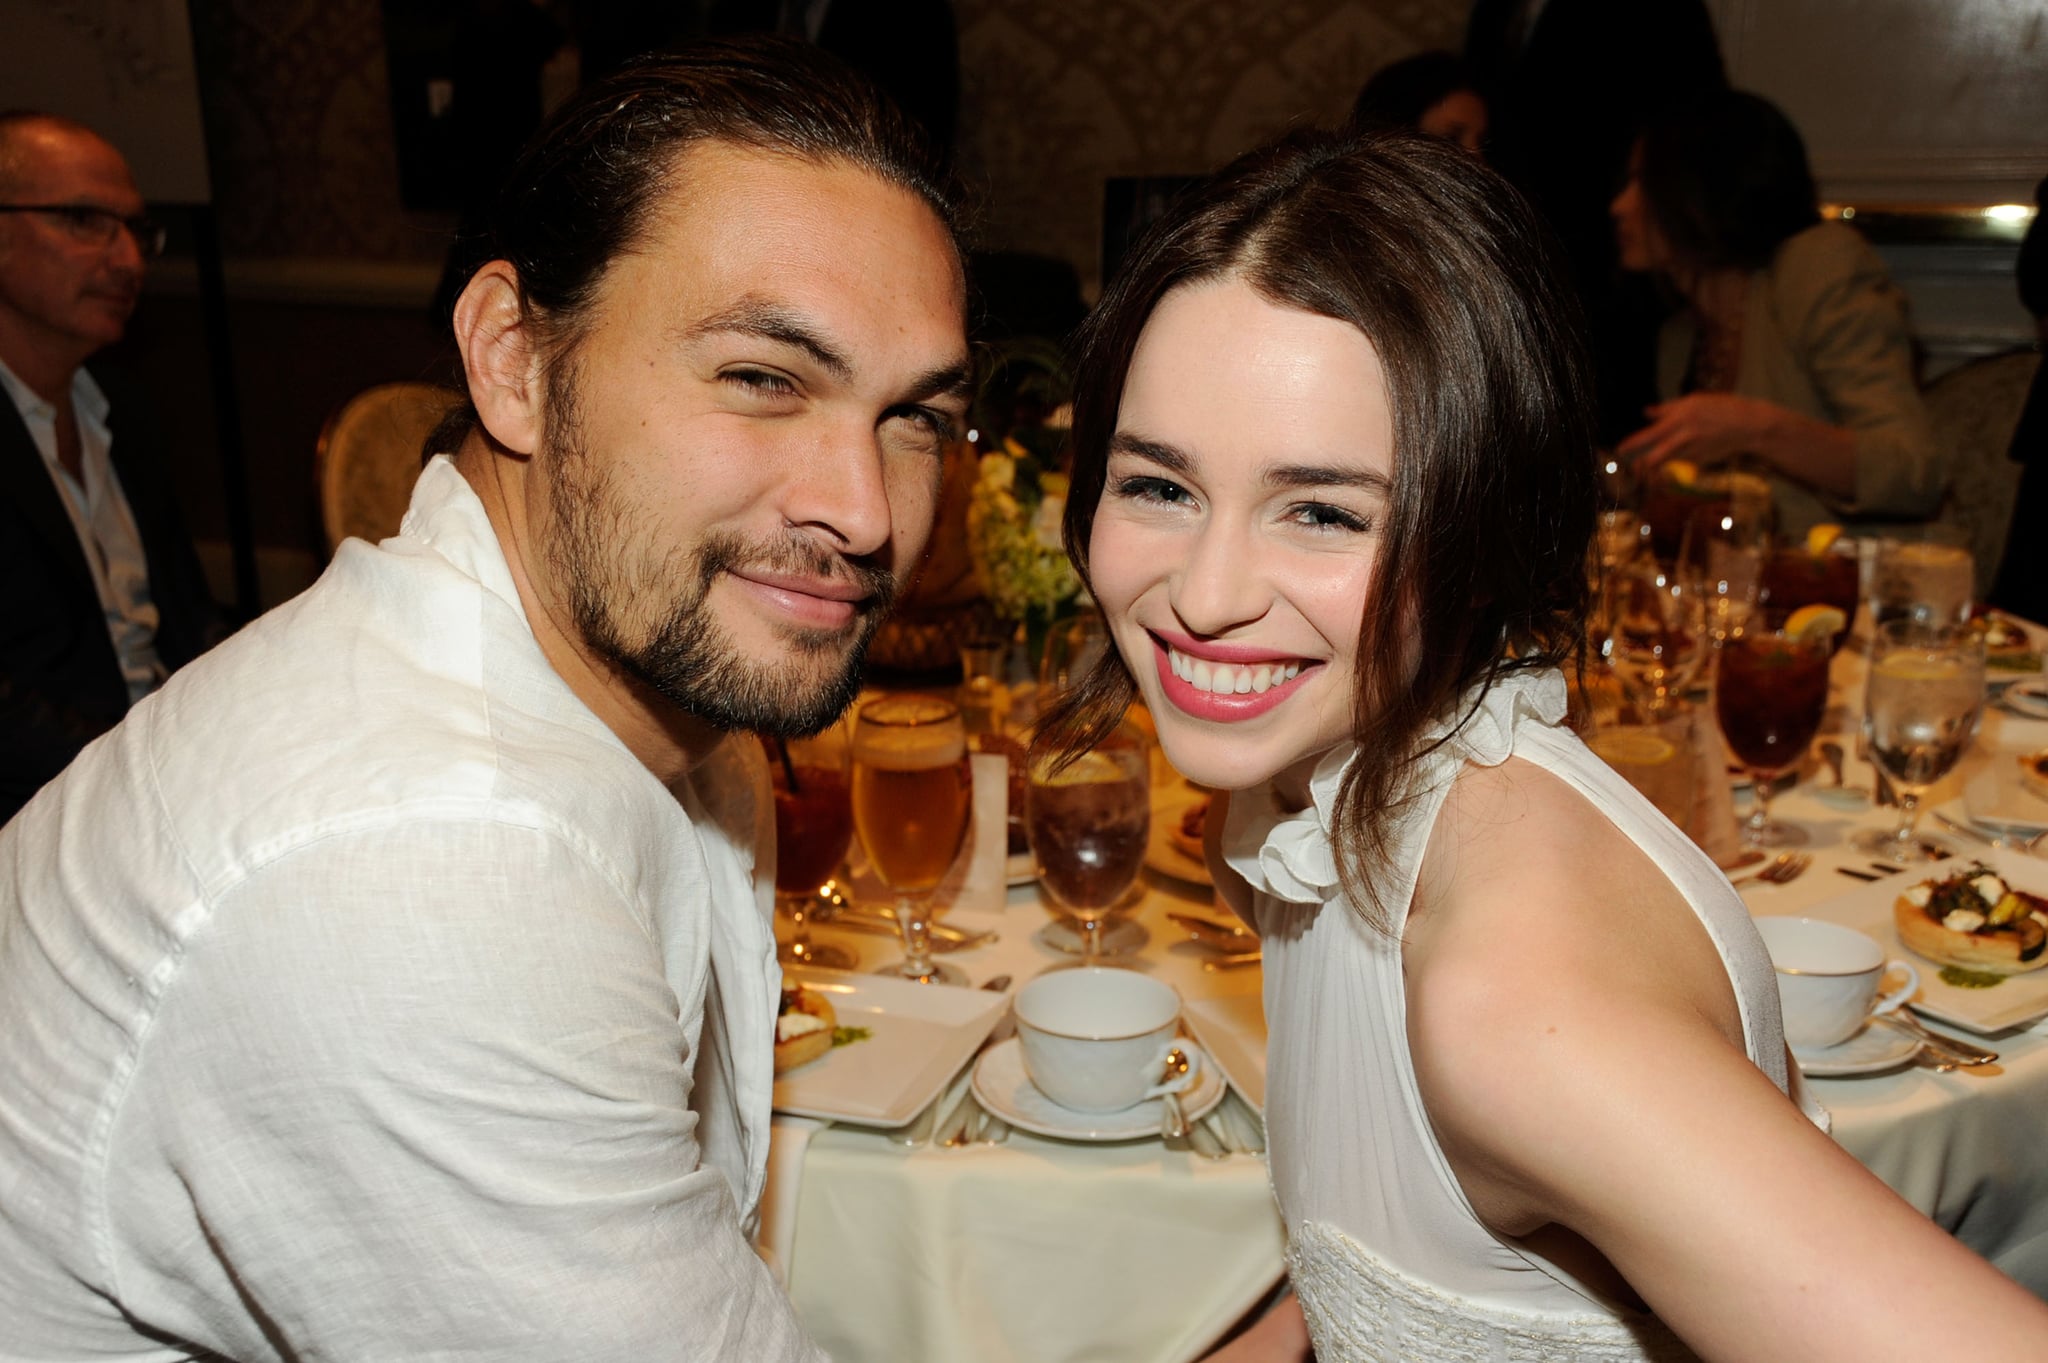 BEVERLY HILLS, CA - JANUARY 13:  Actor Jason Momoa (L) and actress Emilia Clarke attend the 12th Annual AFI Awards held at the Four Seasons Hotel Los Angeles at Beverly Hills on January 13, 2012 in Beverly Hills, California.  (Photo by Frazer Harrison/Getty Images for AFI)